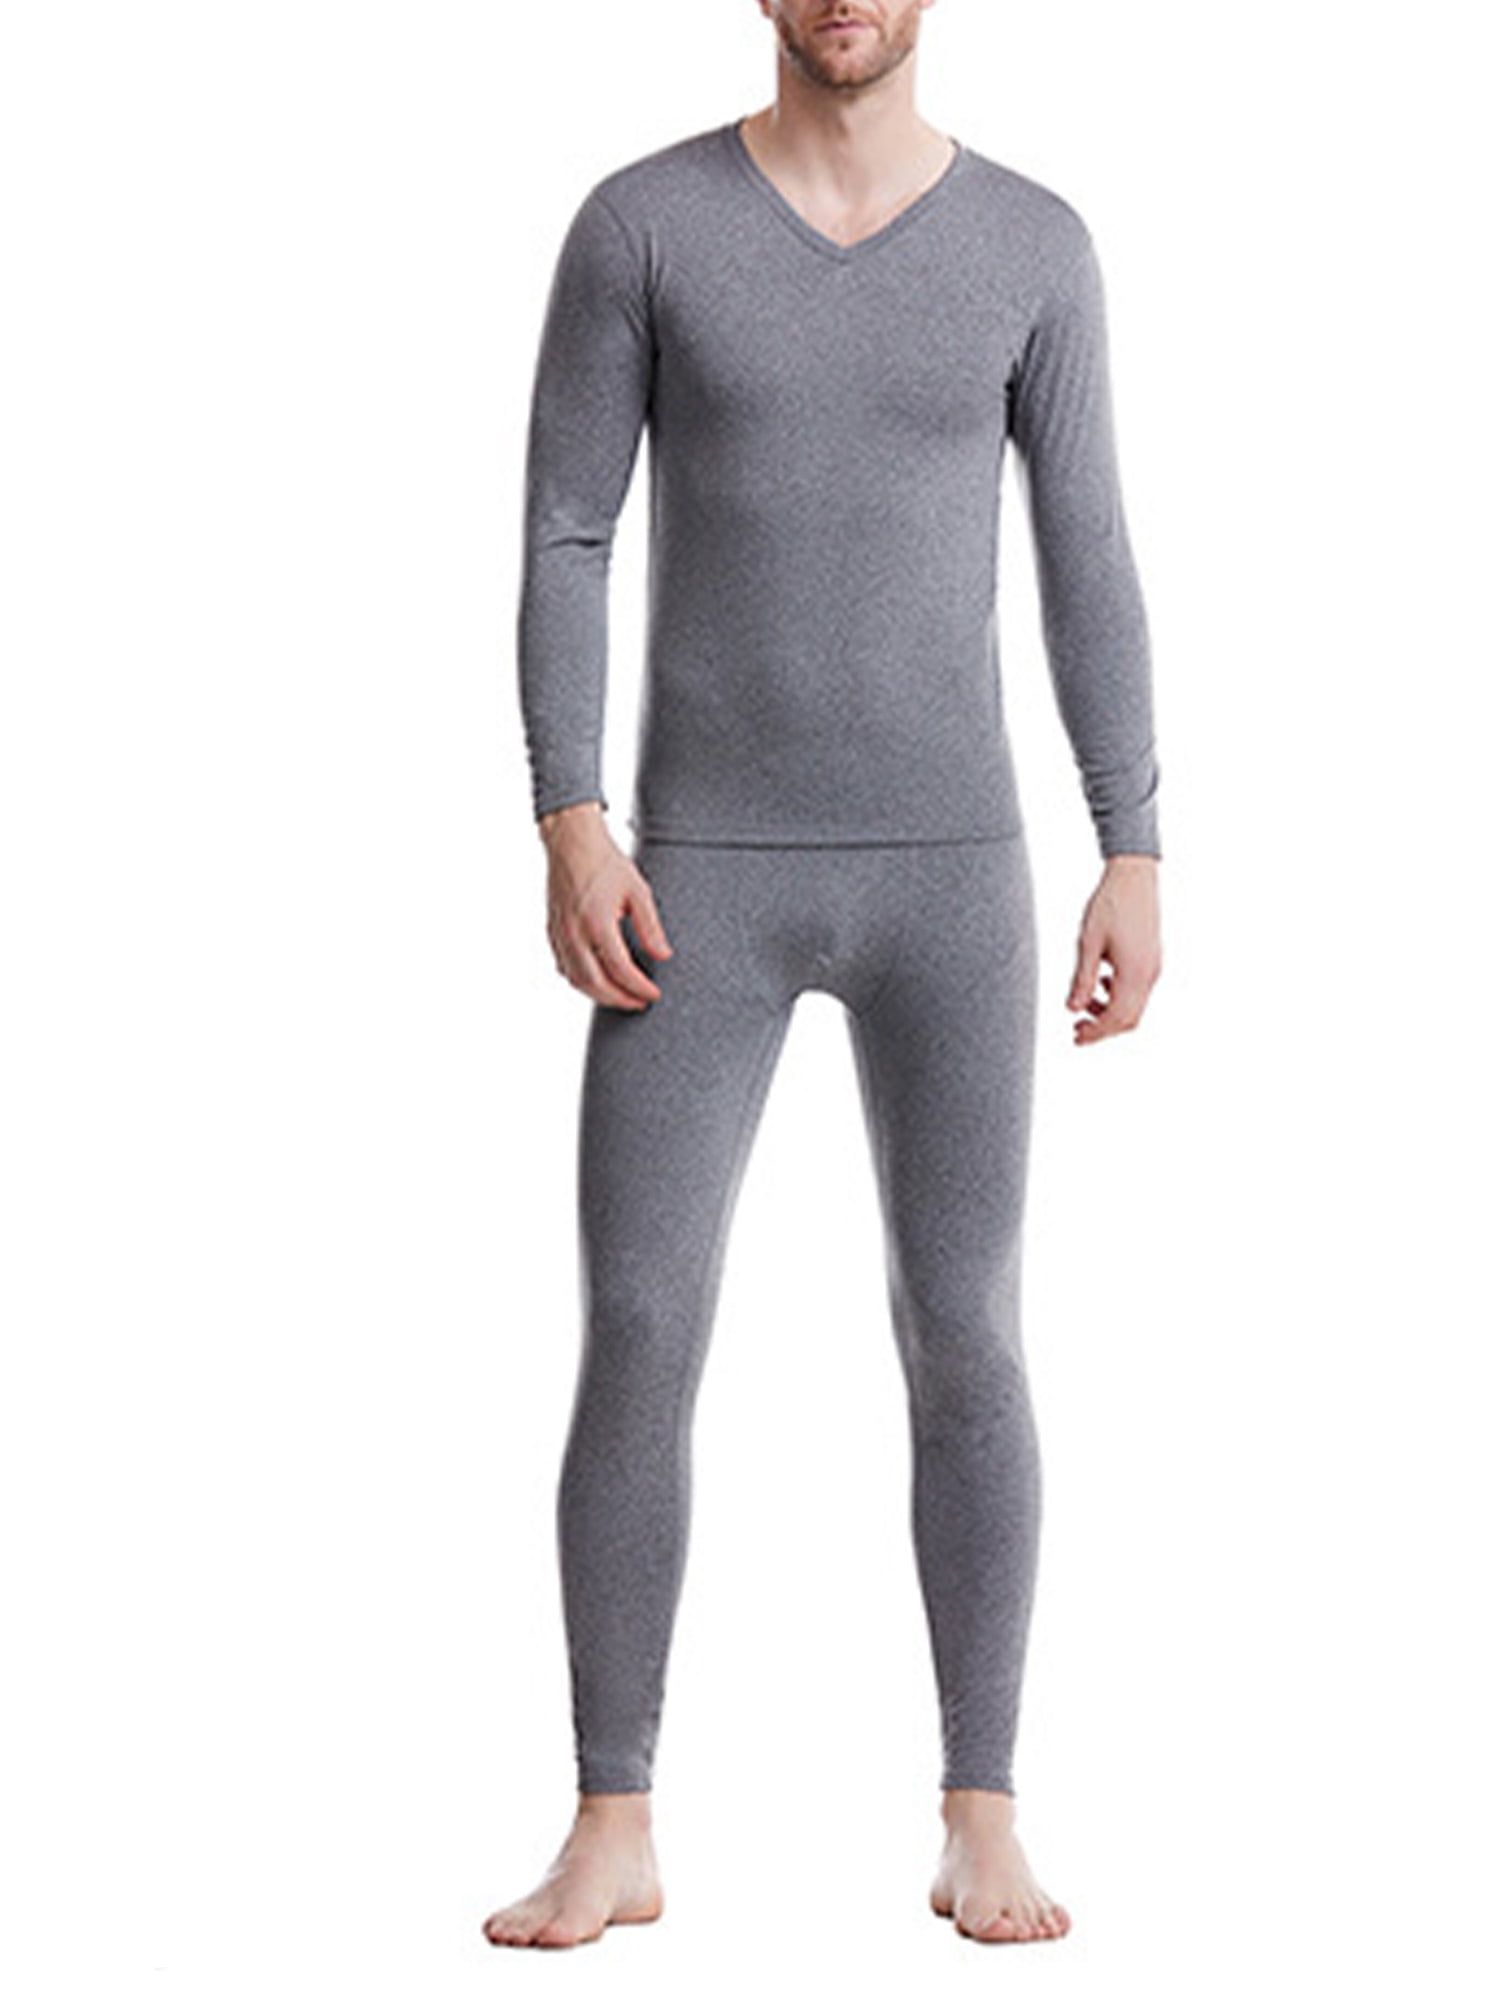 GREAT QUALITY WARM Thermal Lined Fleece Long Johns in White Black Brushed Inner 